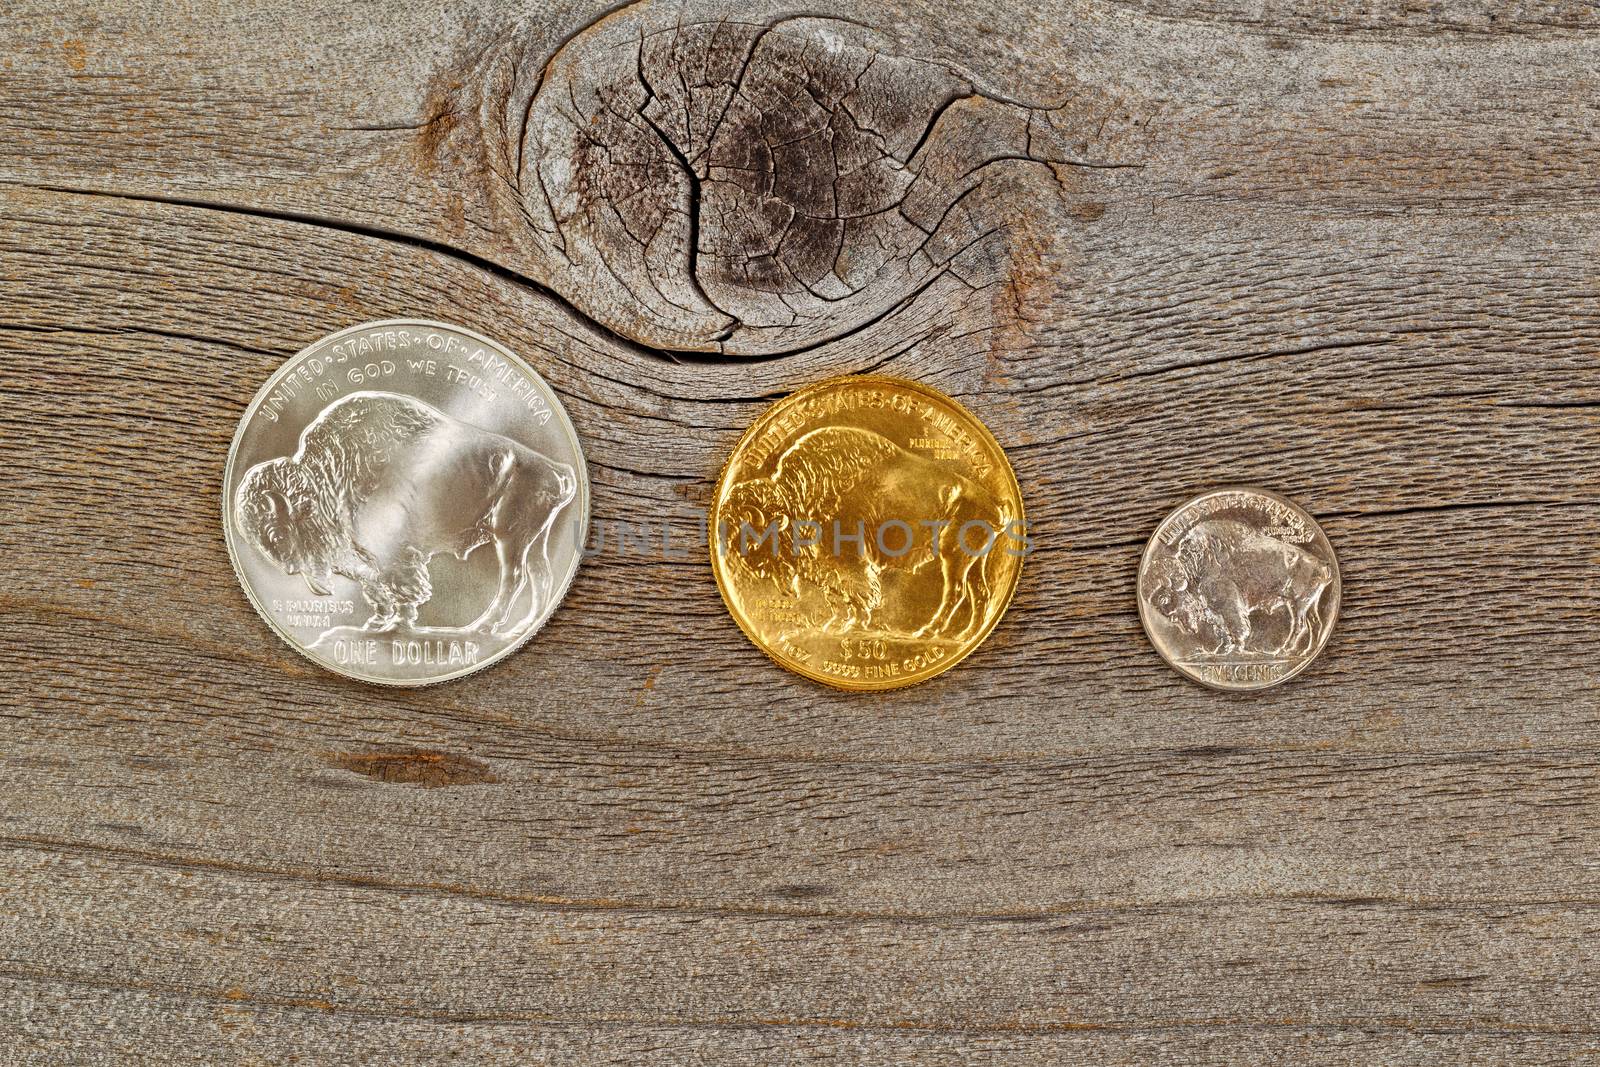 United States Mint issued reverse side of American Buffalo coins, consisting of silver, gold and nickel metals, on rustic wood. 